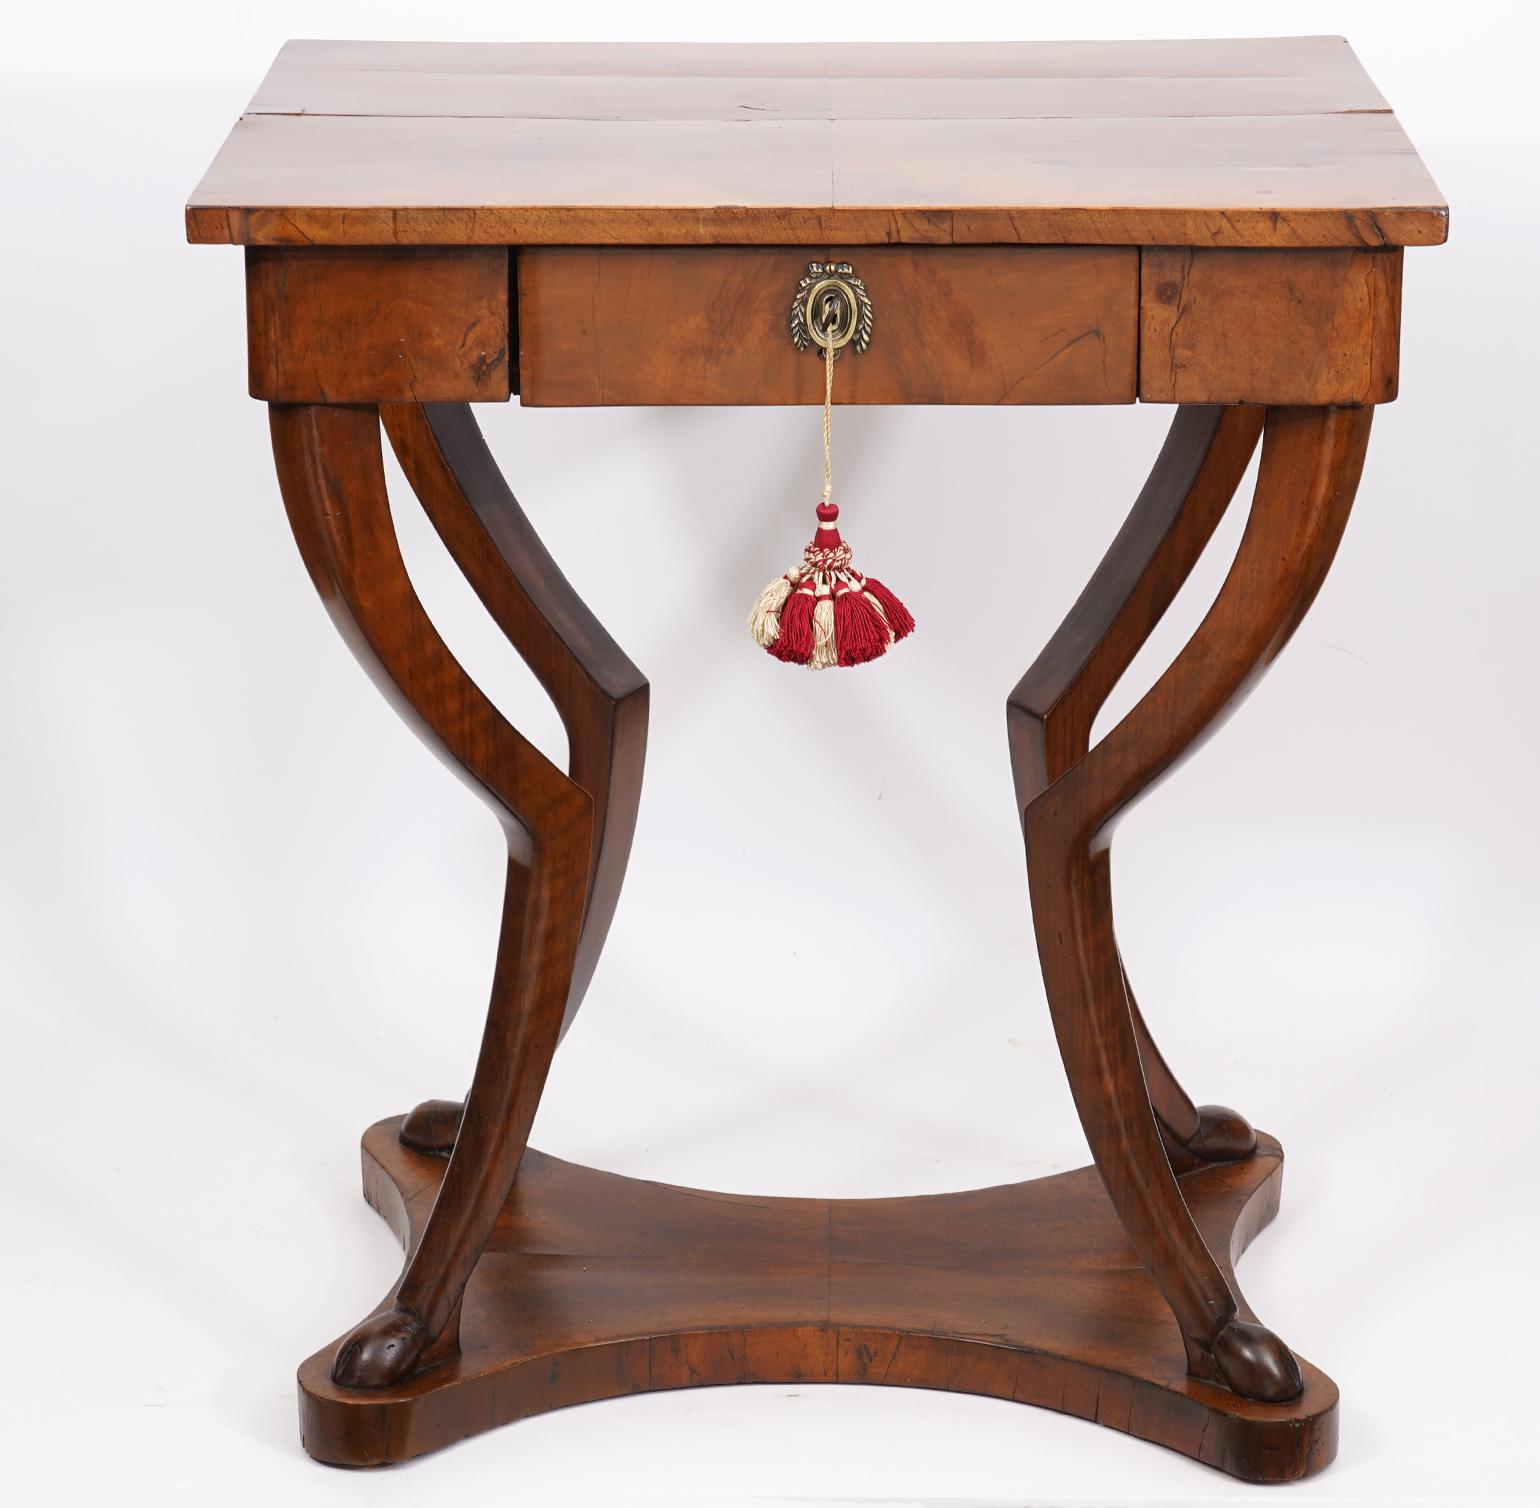 Dating to around 1830-40 This Biedermeier walnut sewing table features sculptural animal style carved legs and stylized hoof feet resting on a shaped base. The drawer is sectioned into paper lined compartments.